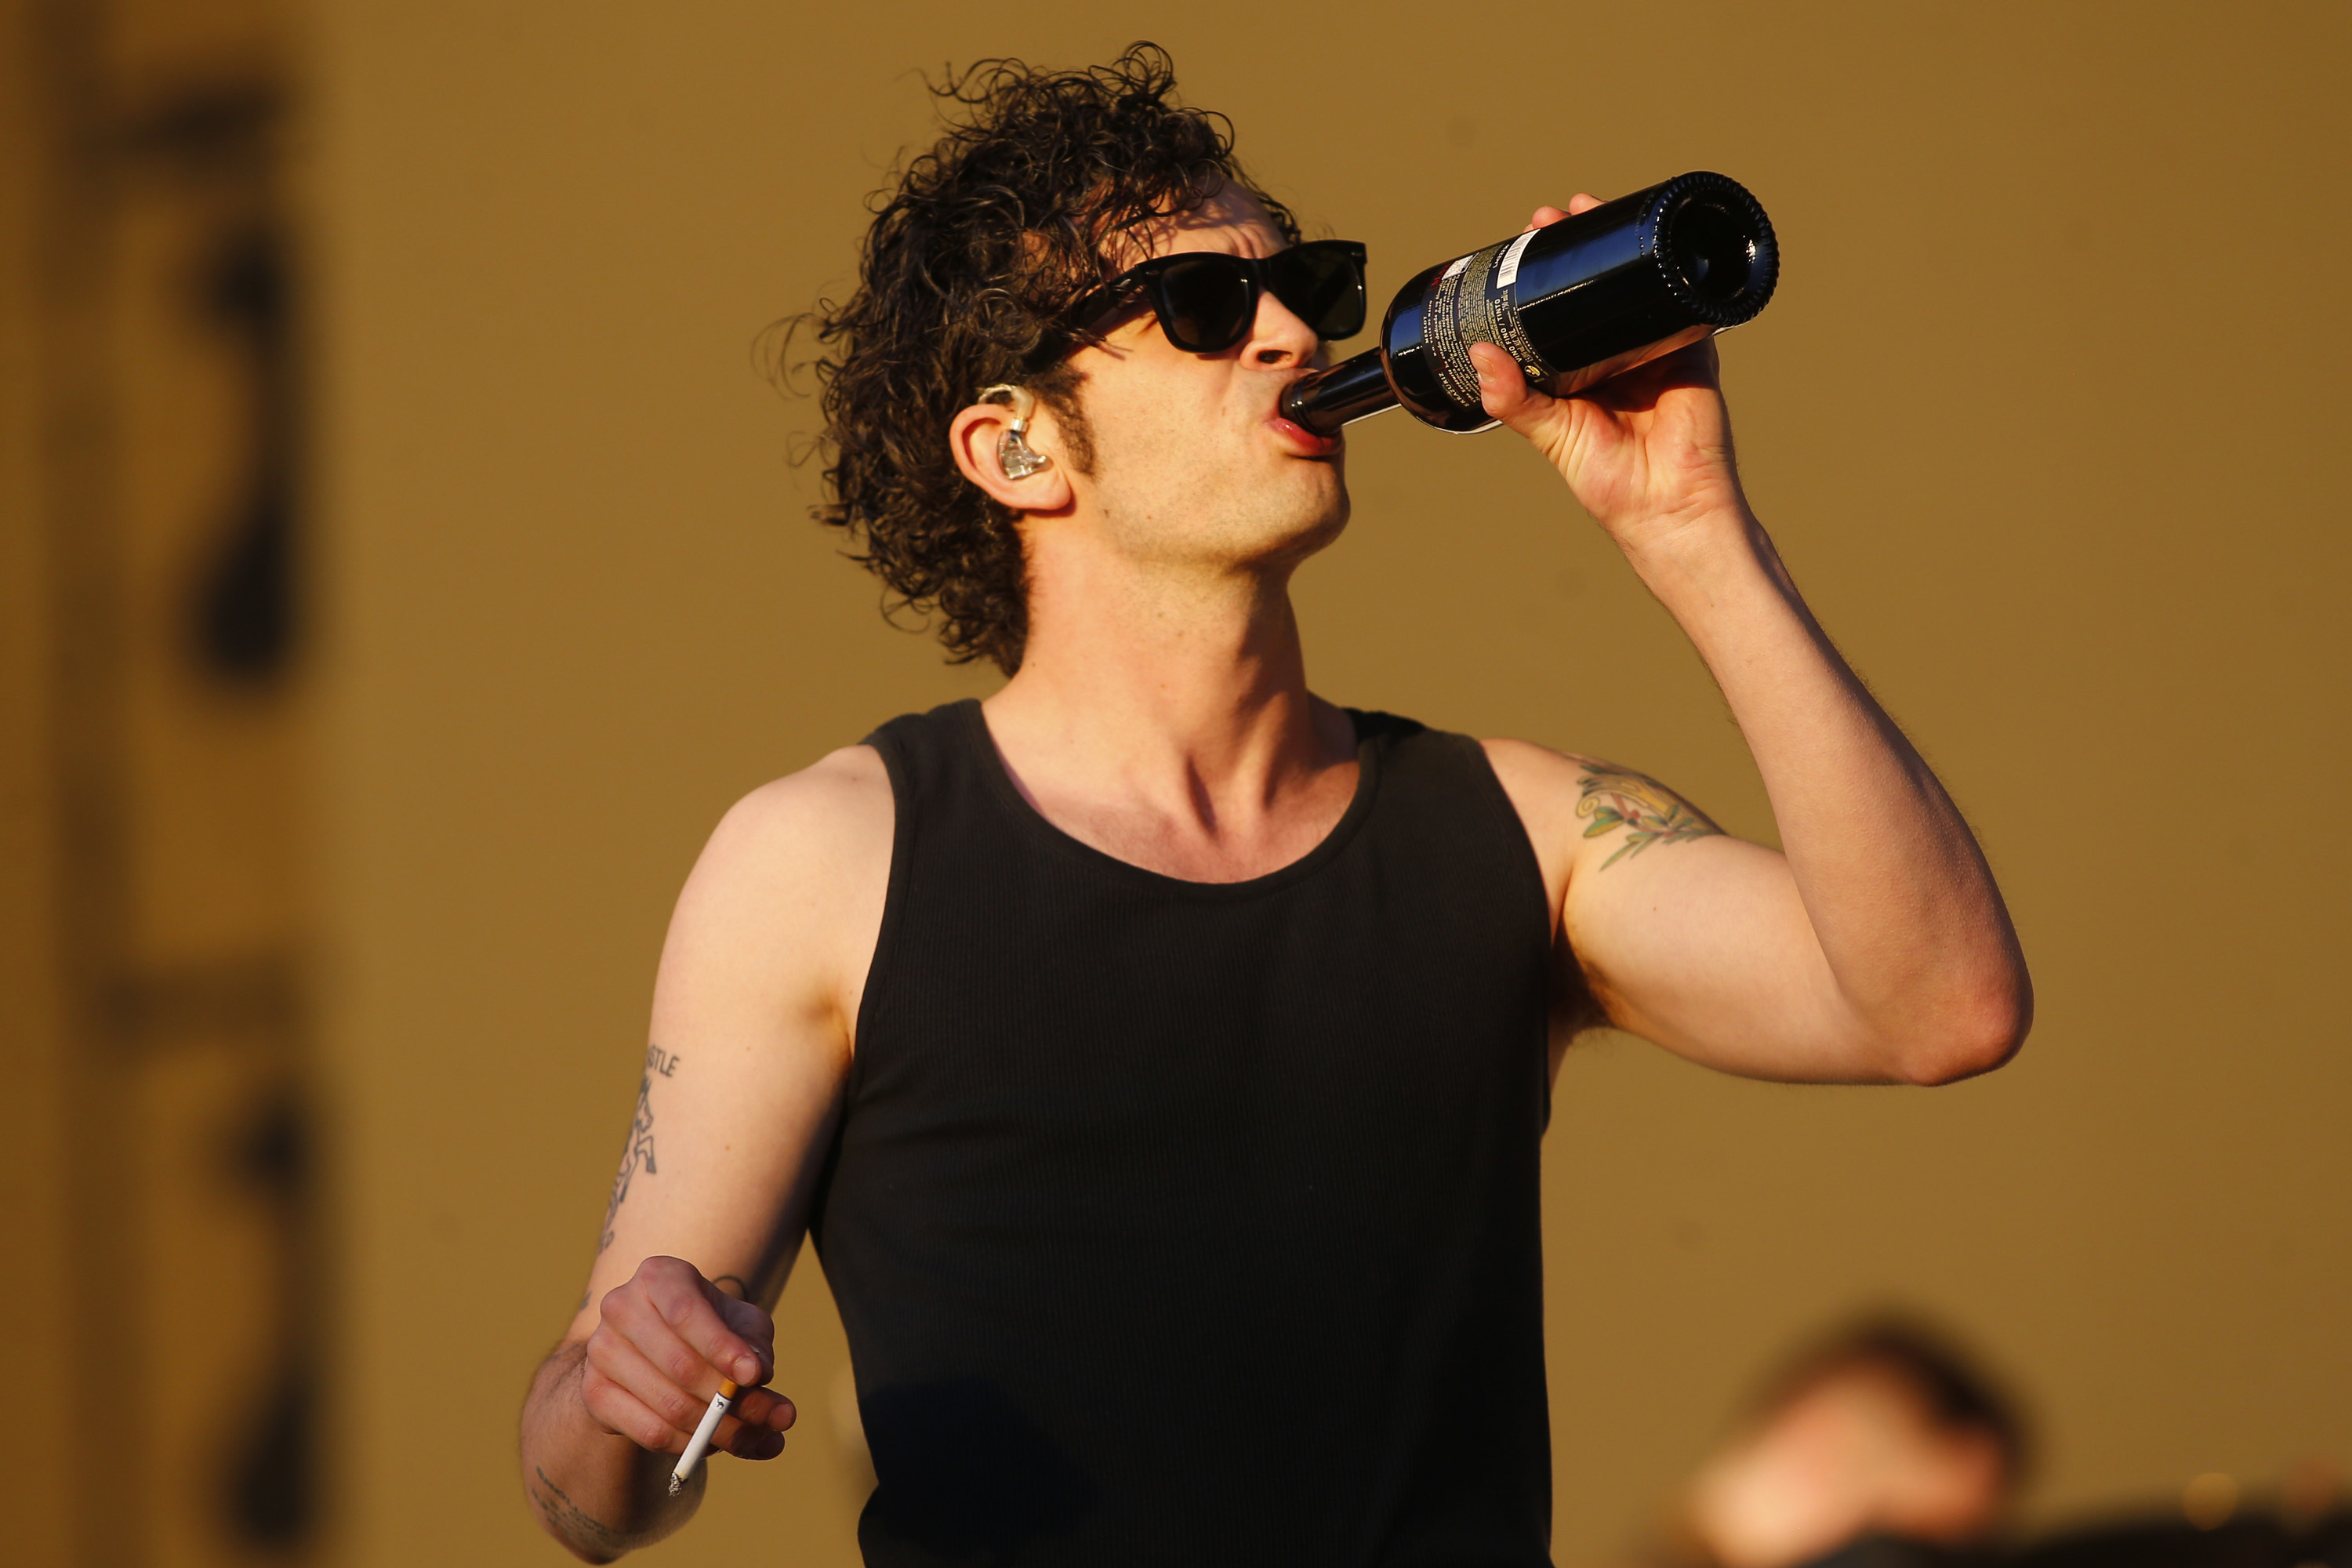 Close-up of Matty drinking from a bottle and holding a cigarette